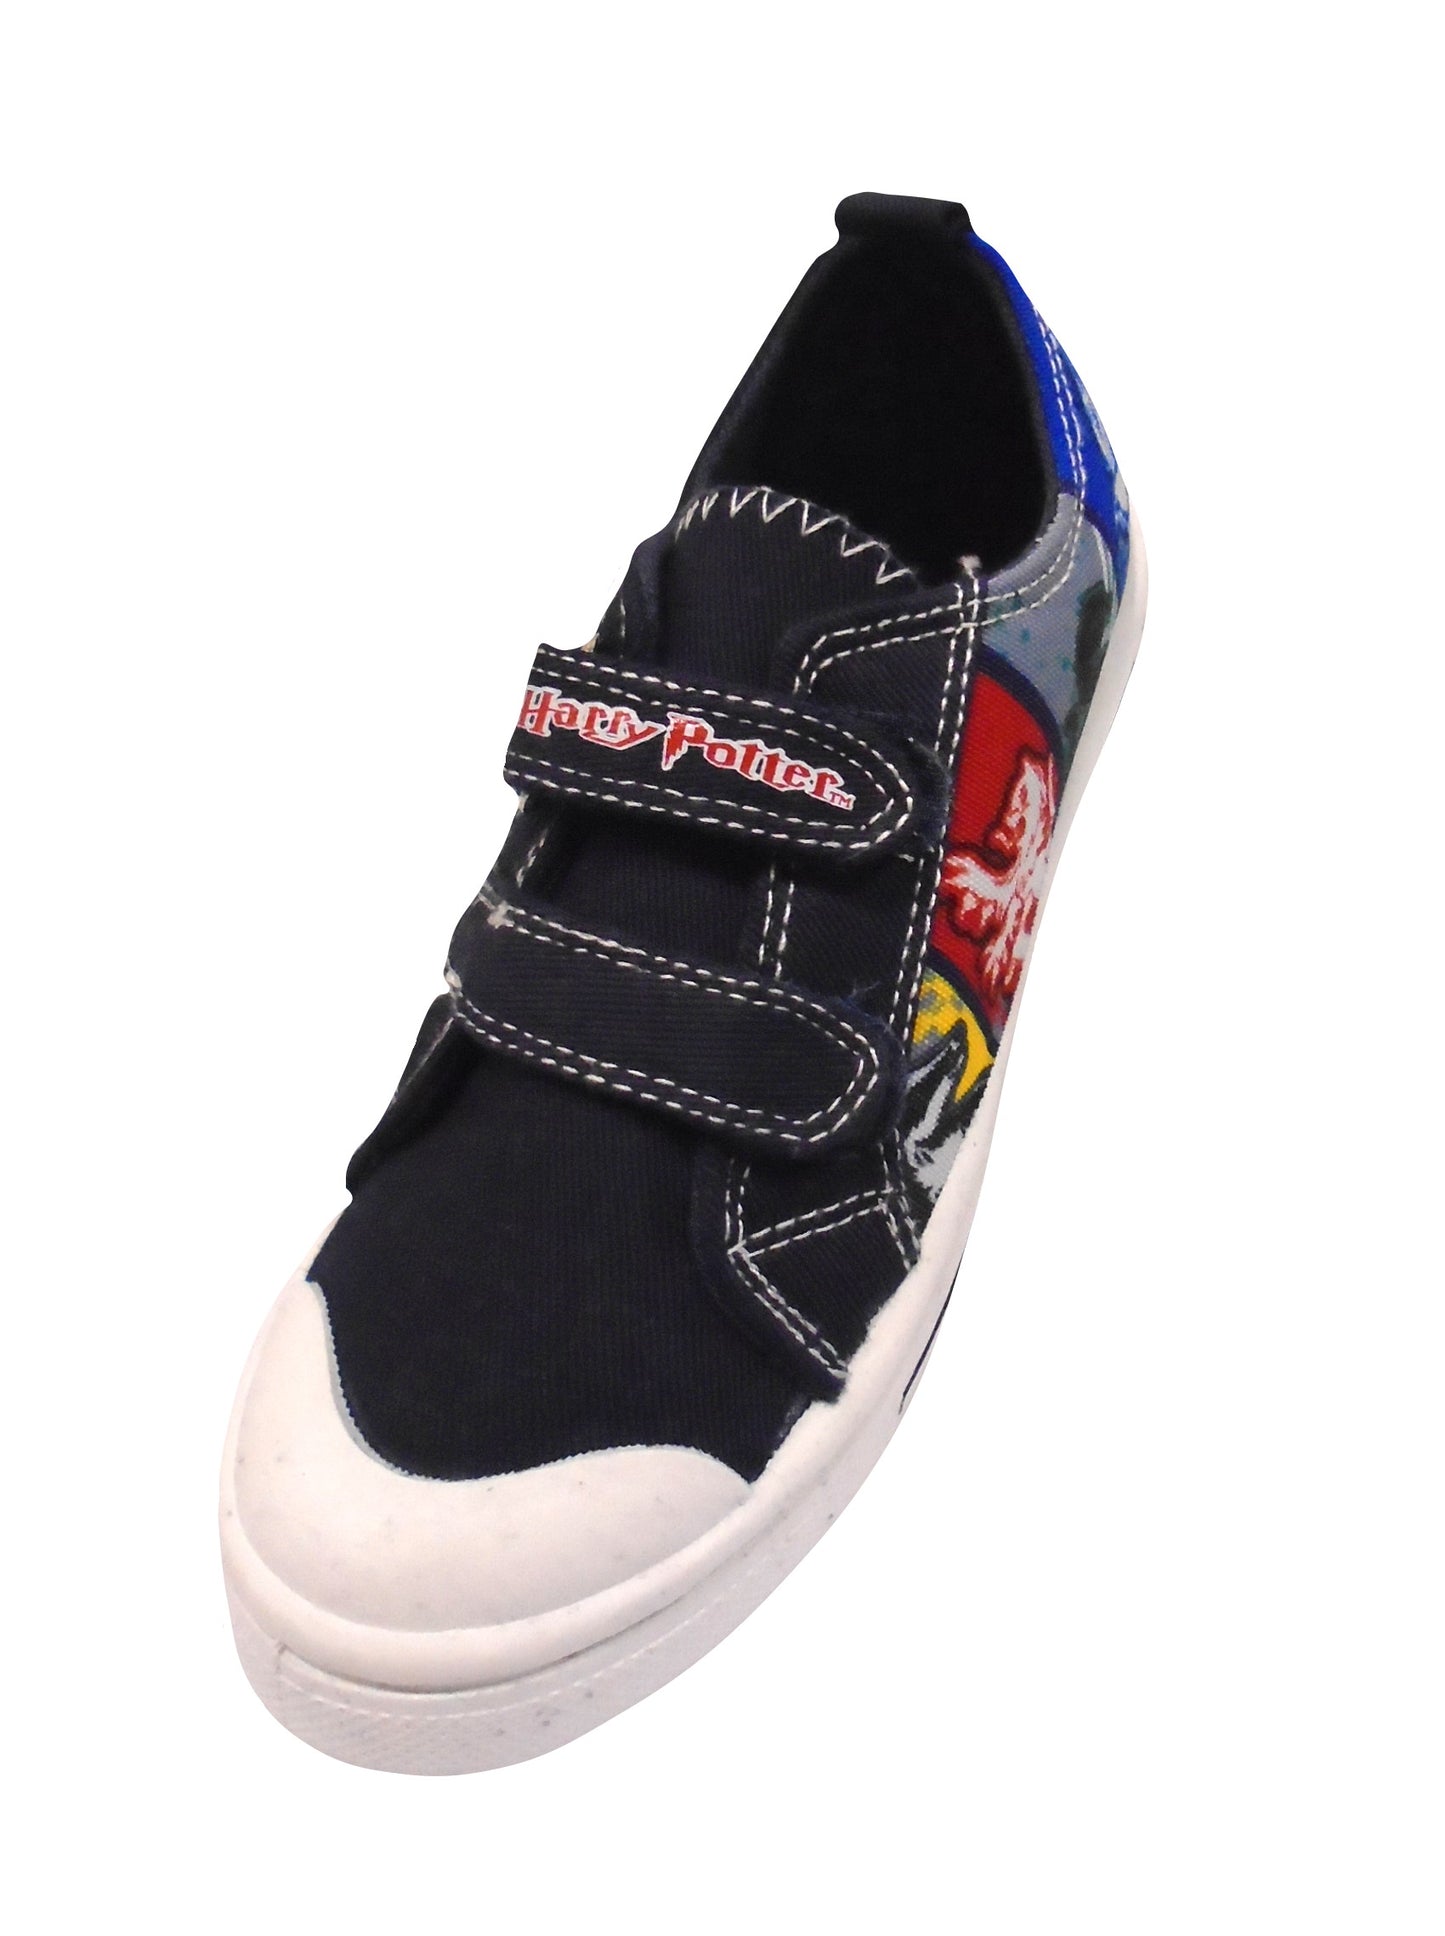 REDUCED TO CLEAR DAMAGED Harry Potter "Houses" Boys Canvas Pump Shoes